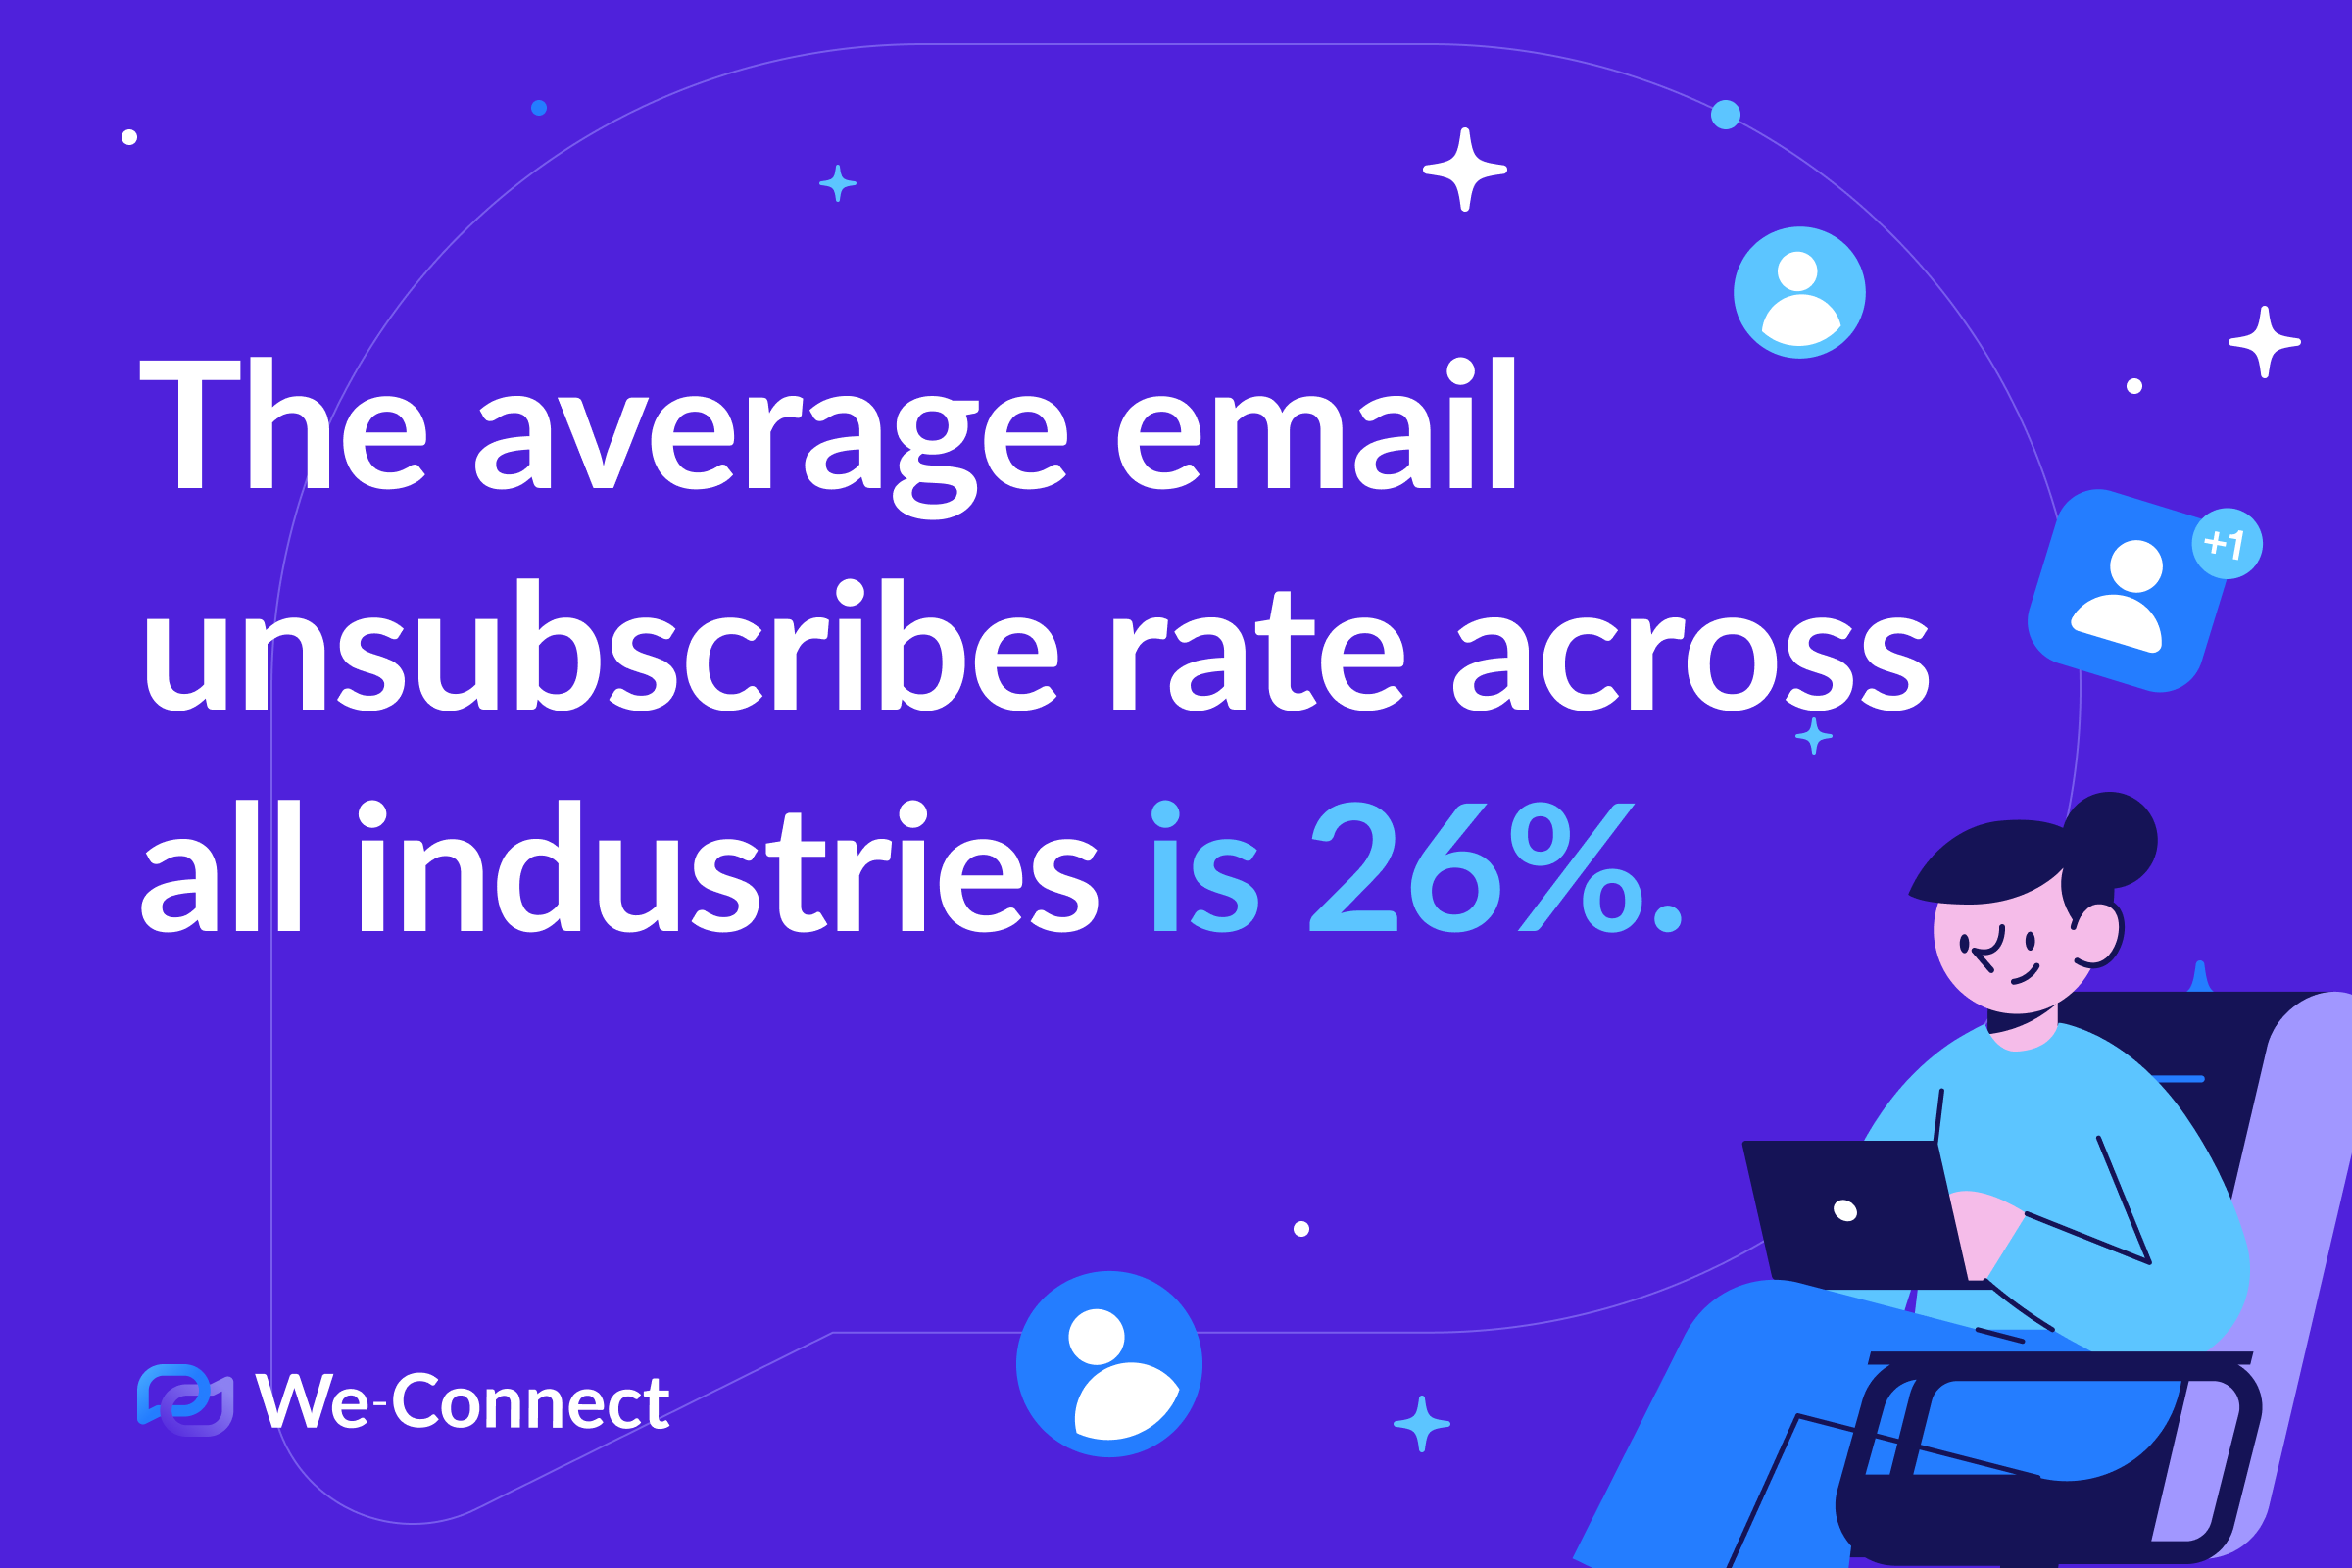 The average email unsubscribe rate across all industries is 26%.